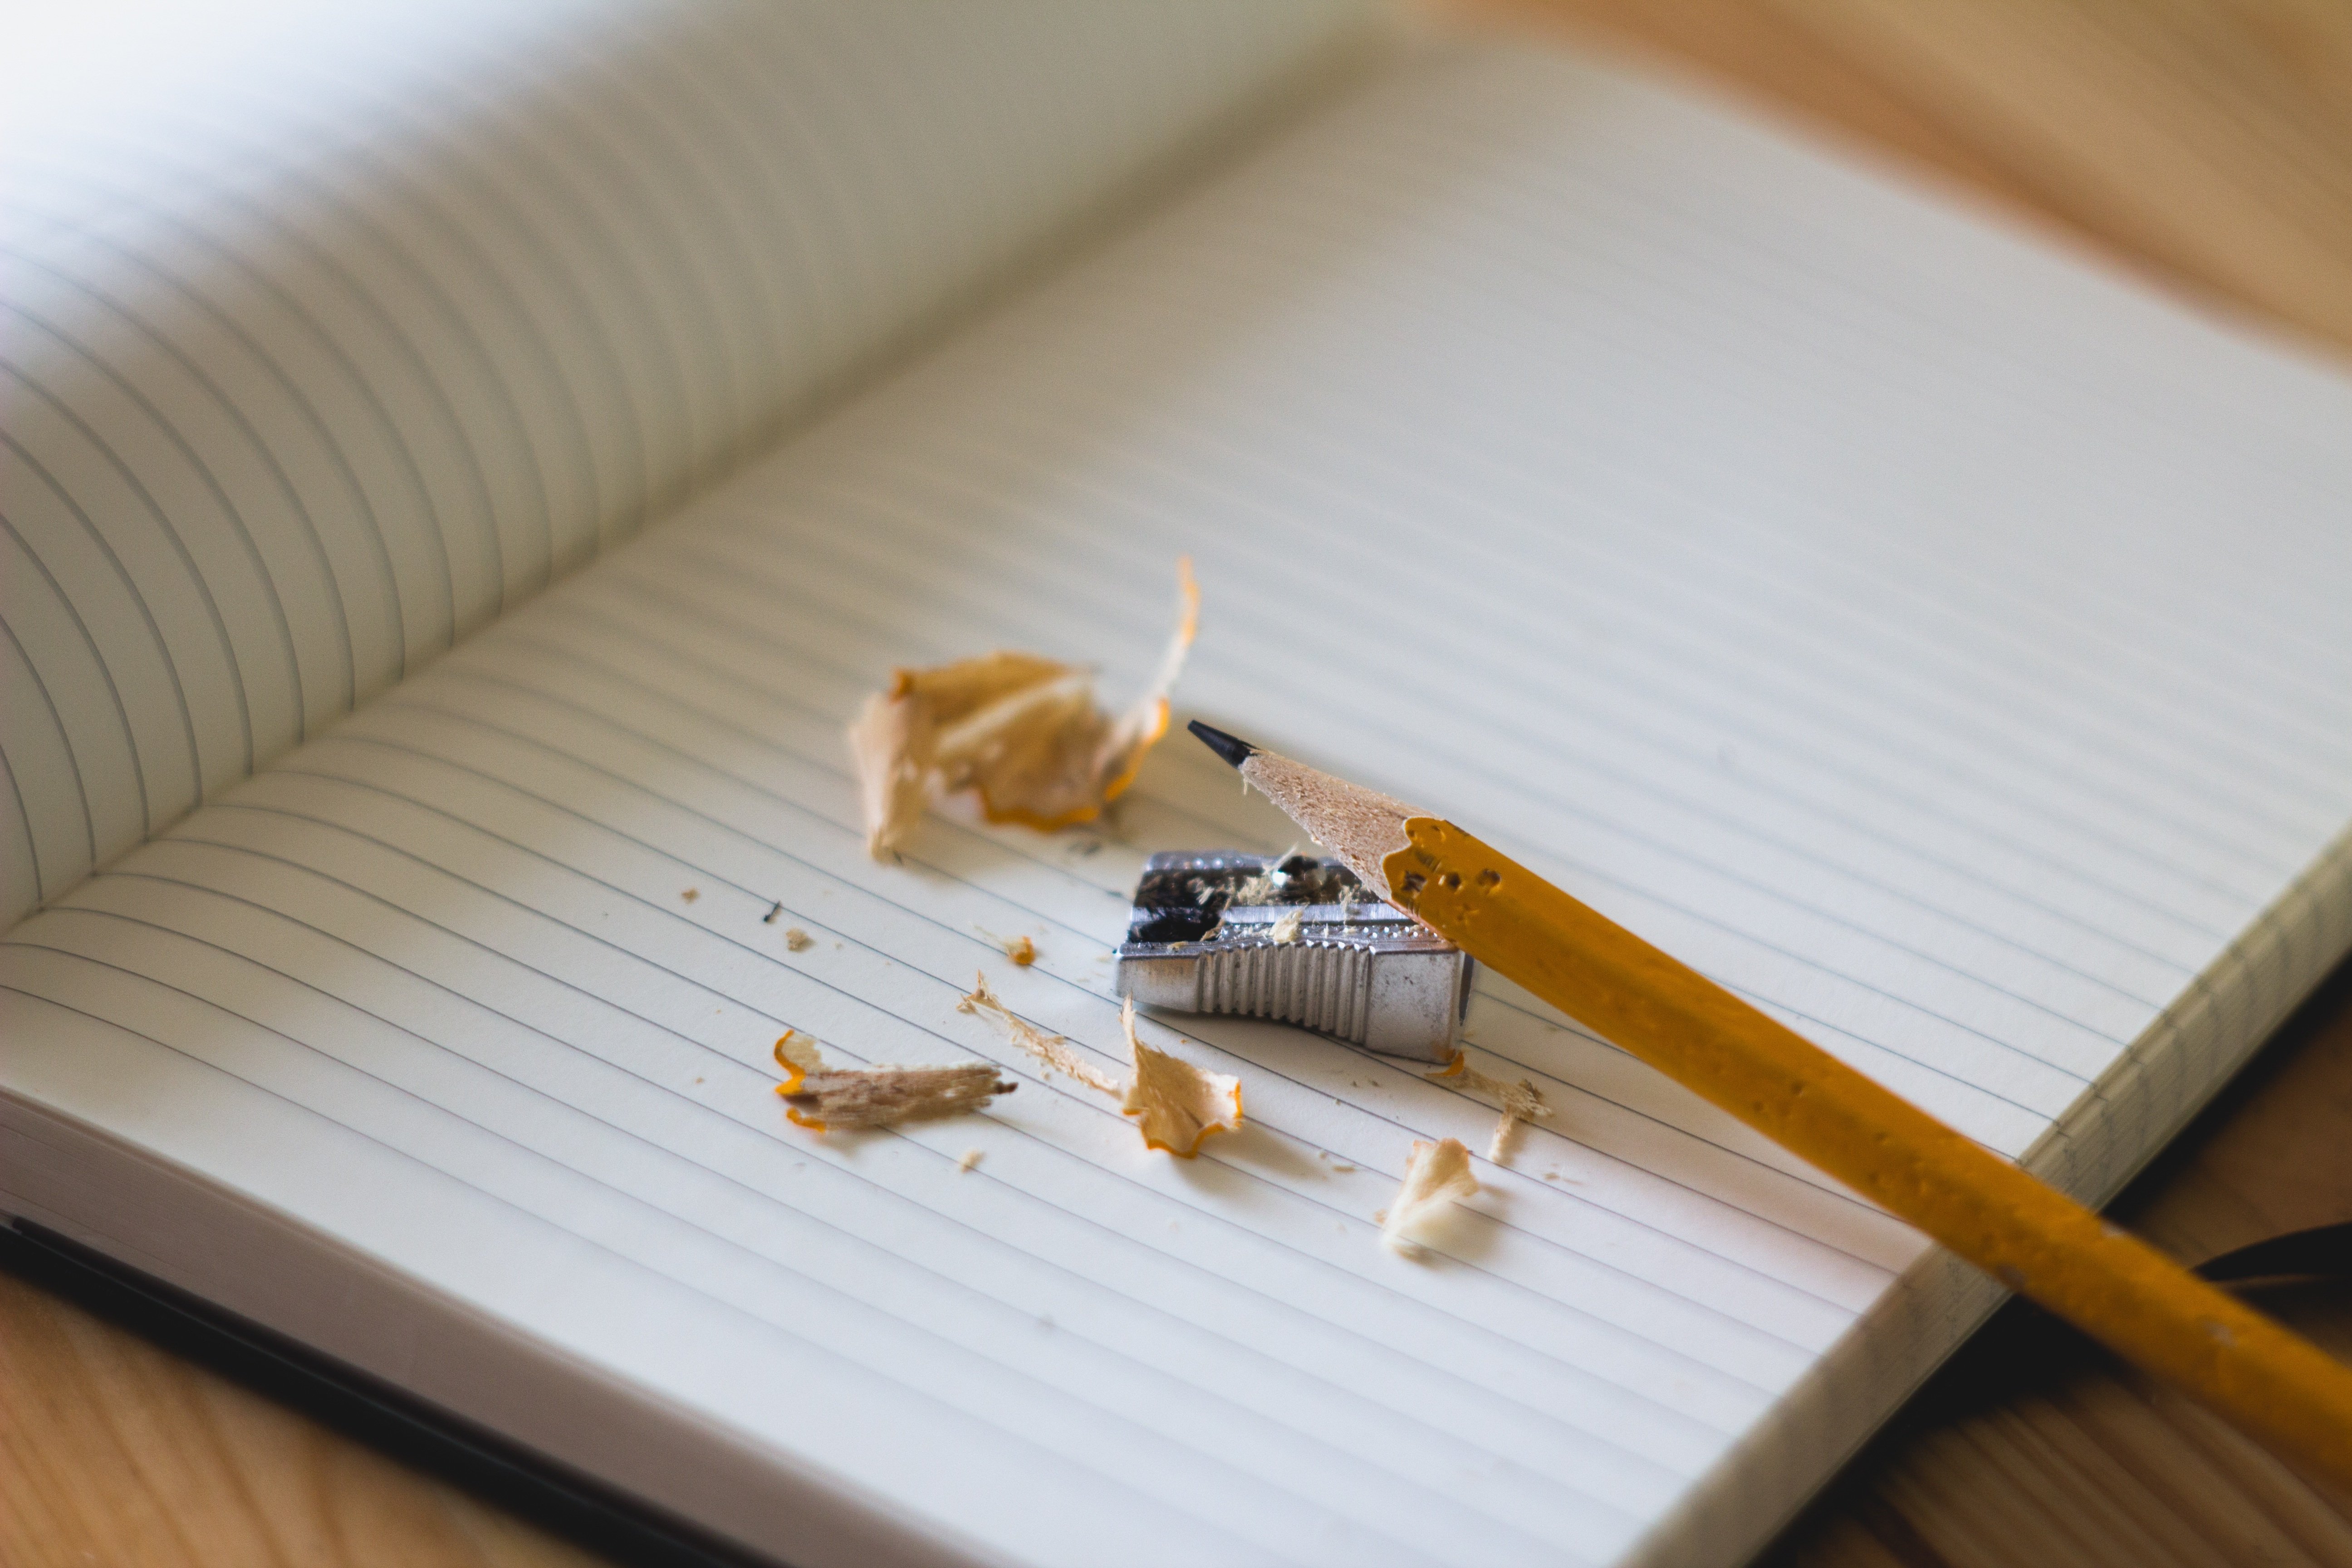 A pencil and a pencil sharpener lying on a notebook.